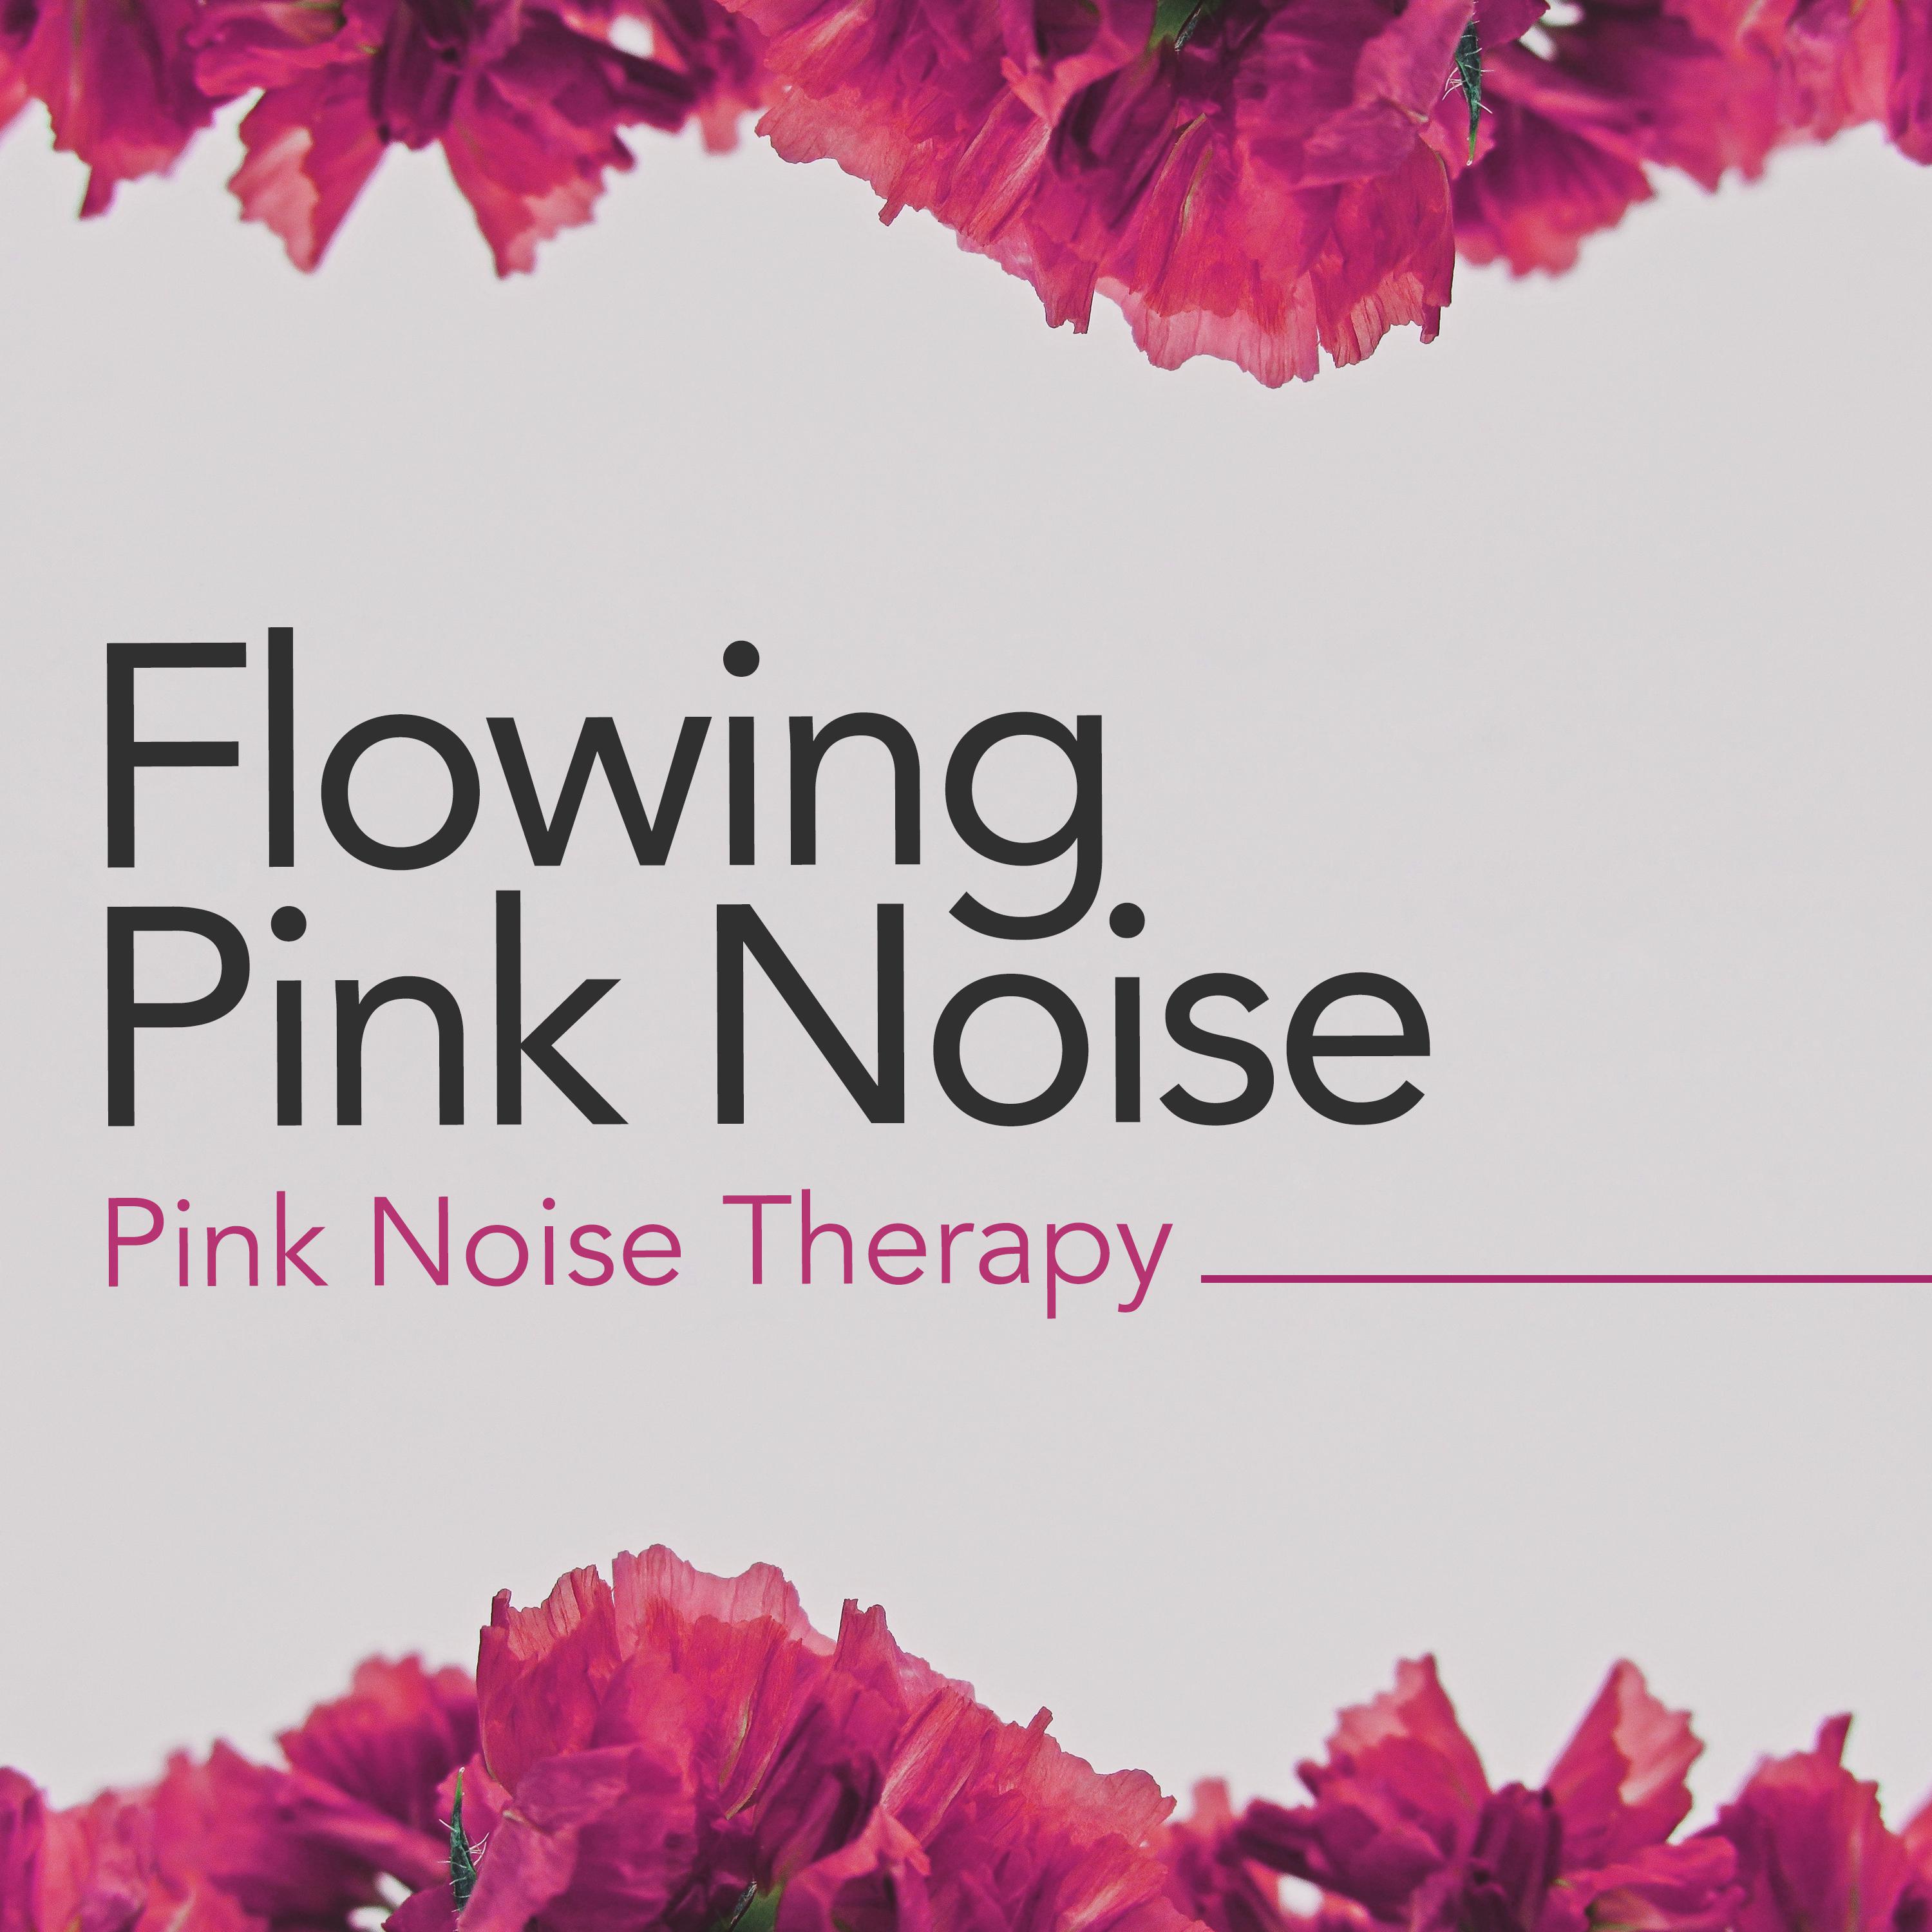 Flowing Pink Noise